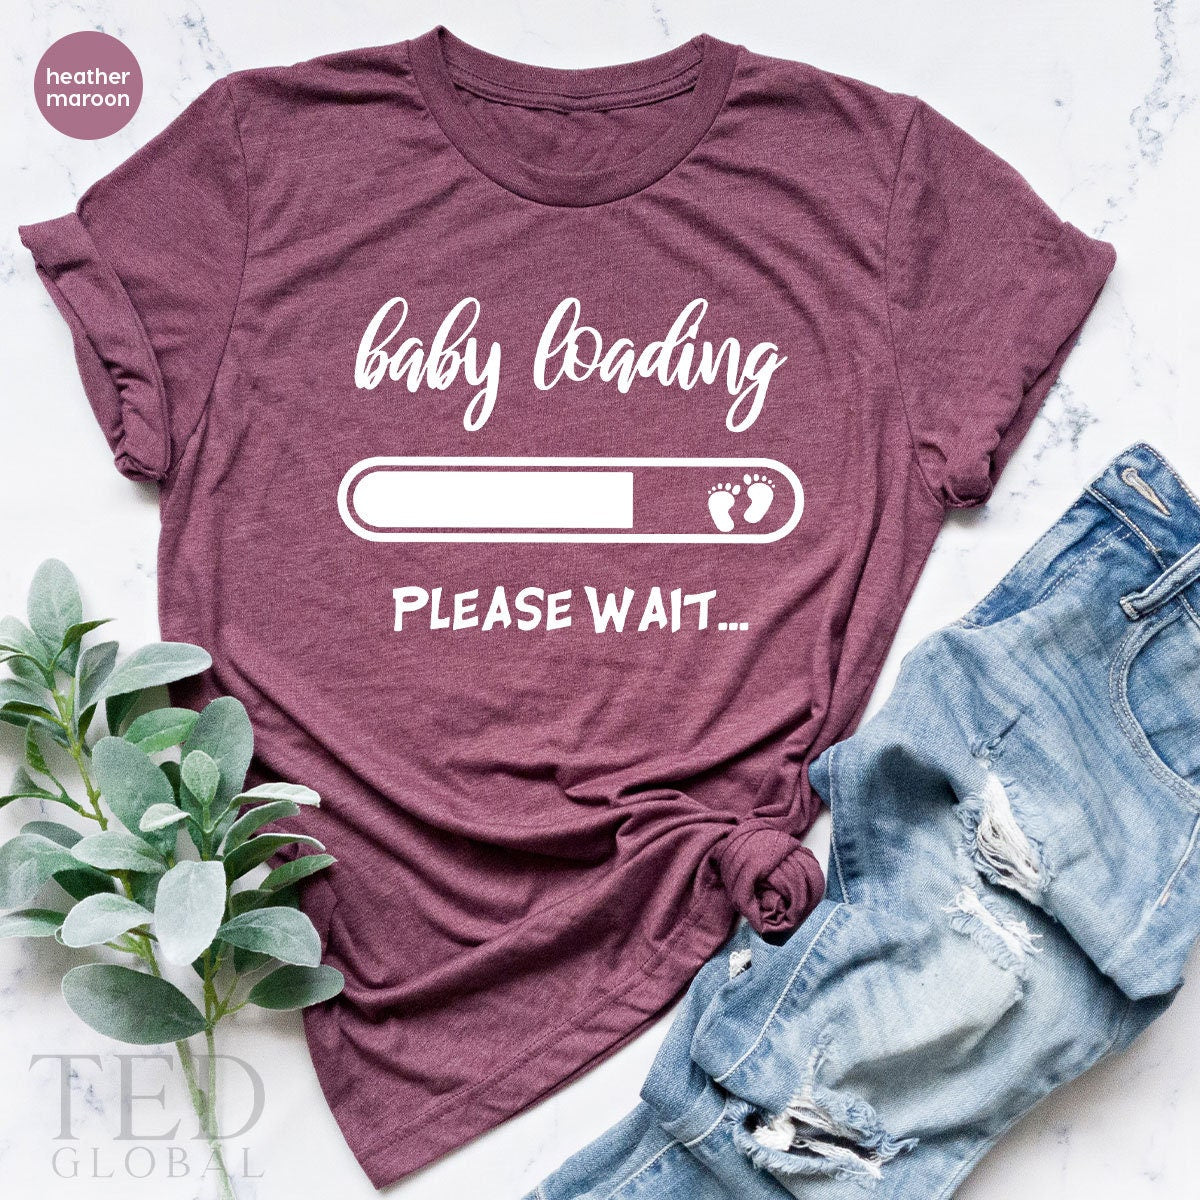 Funny Pregnant T Shirt, First Mothers Day Gift, Baby Announcement TShirt, New Mom Shirt, Baby Loading Please Wait T-Shirt, Maternity Tee - Fastdeliverytees.com